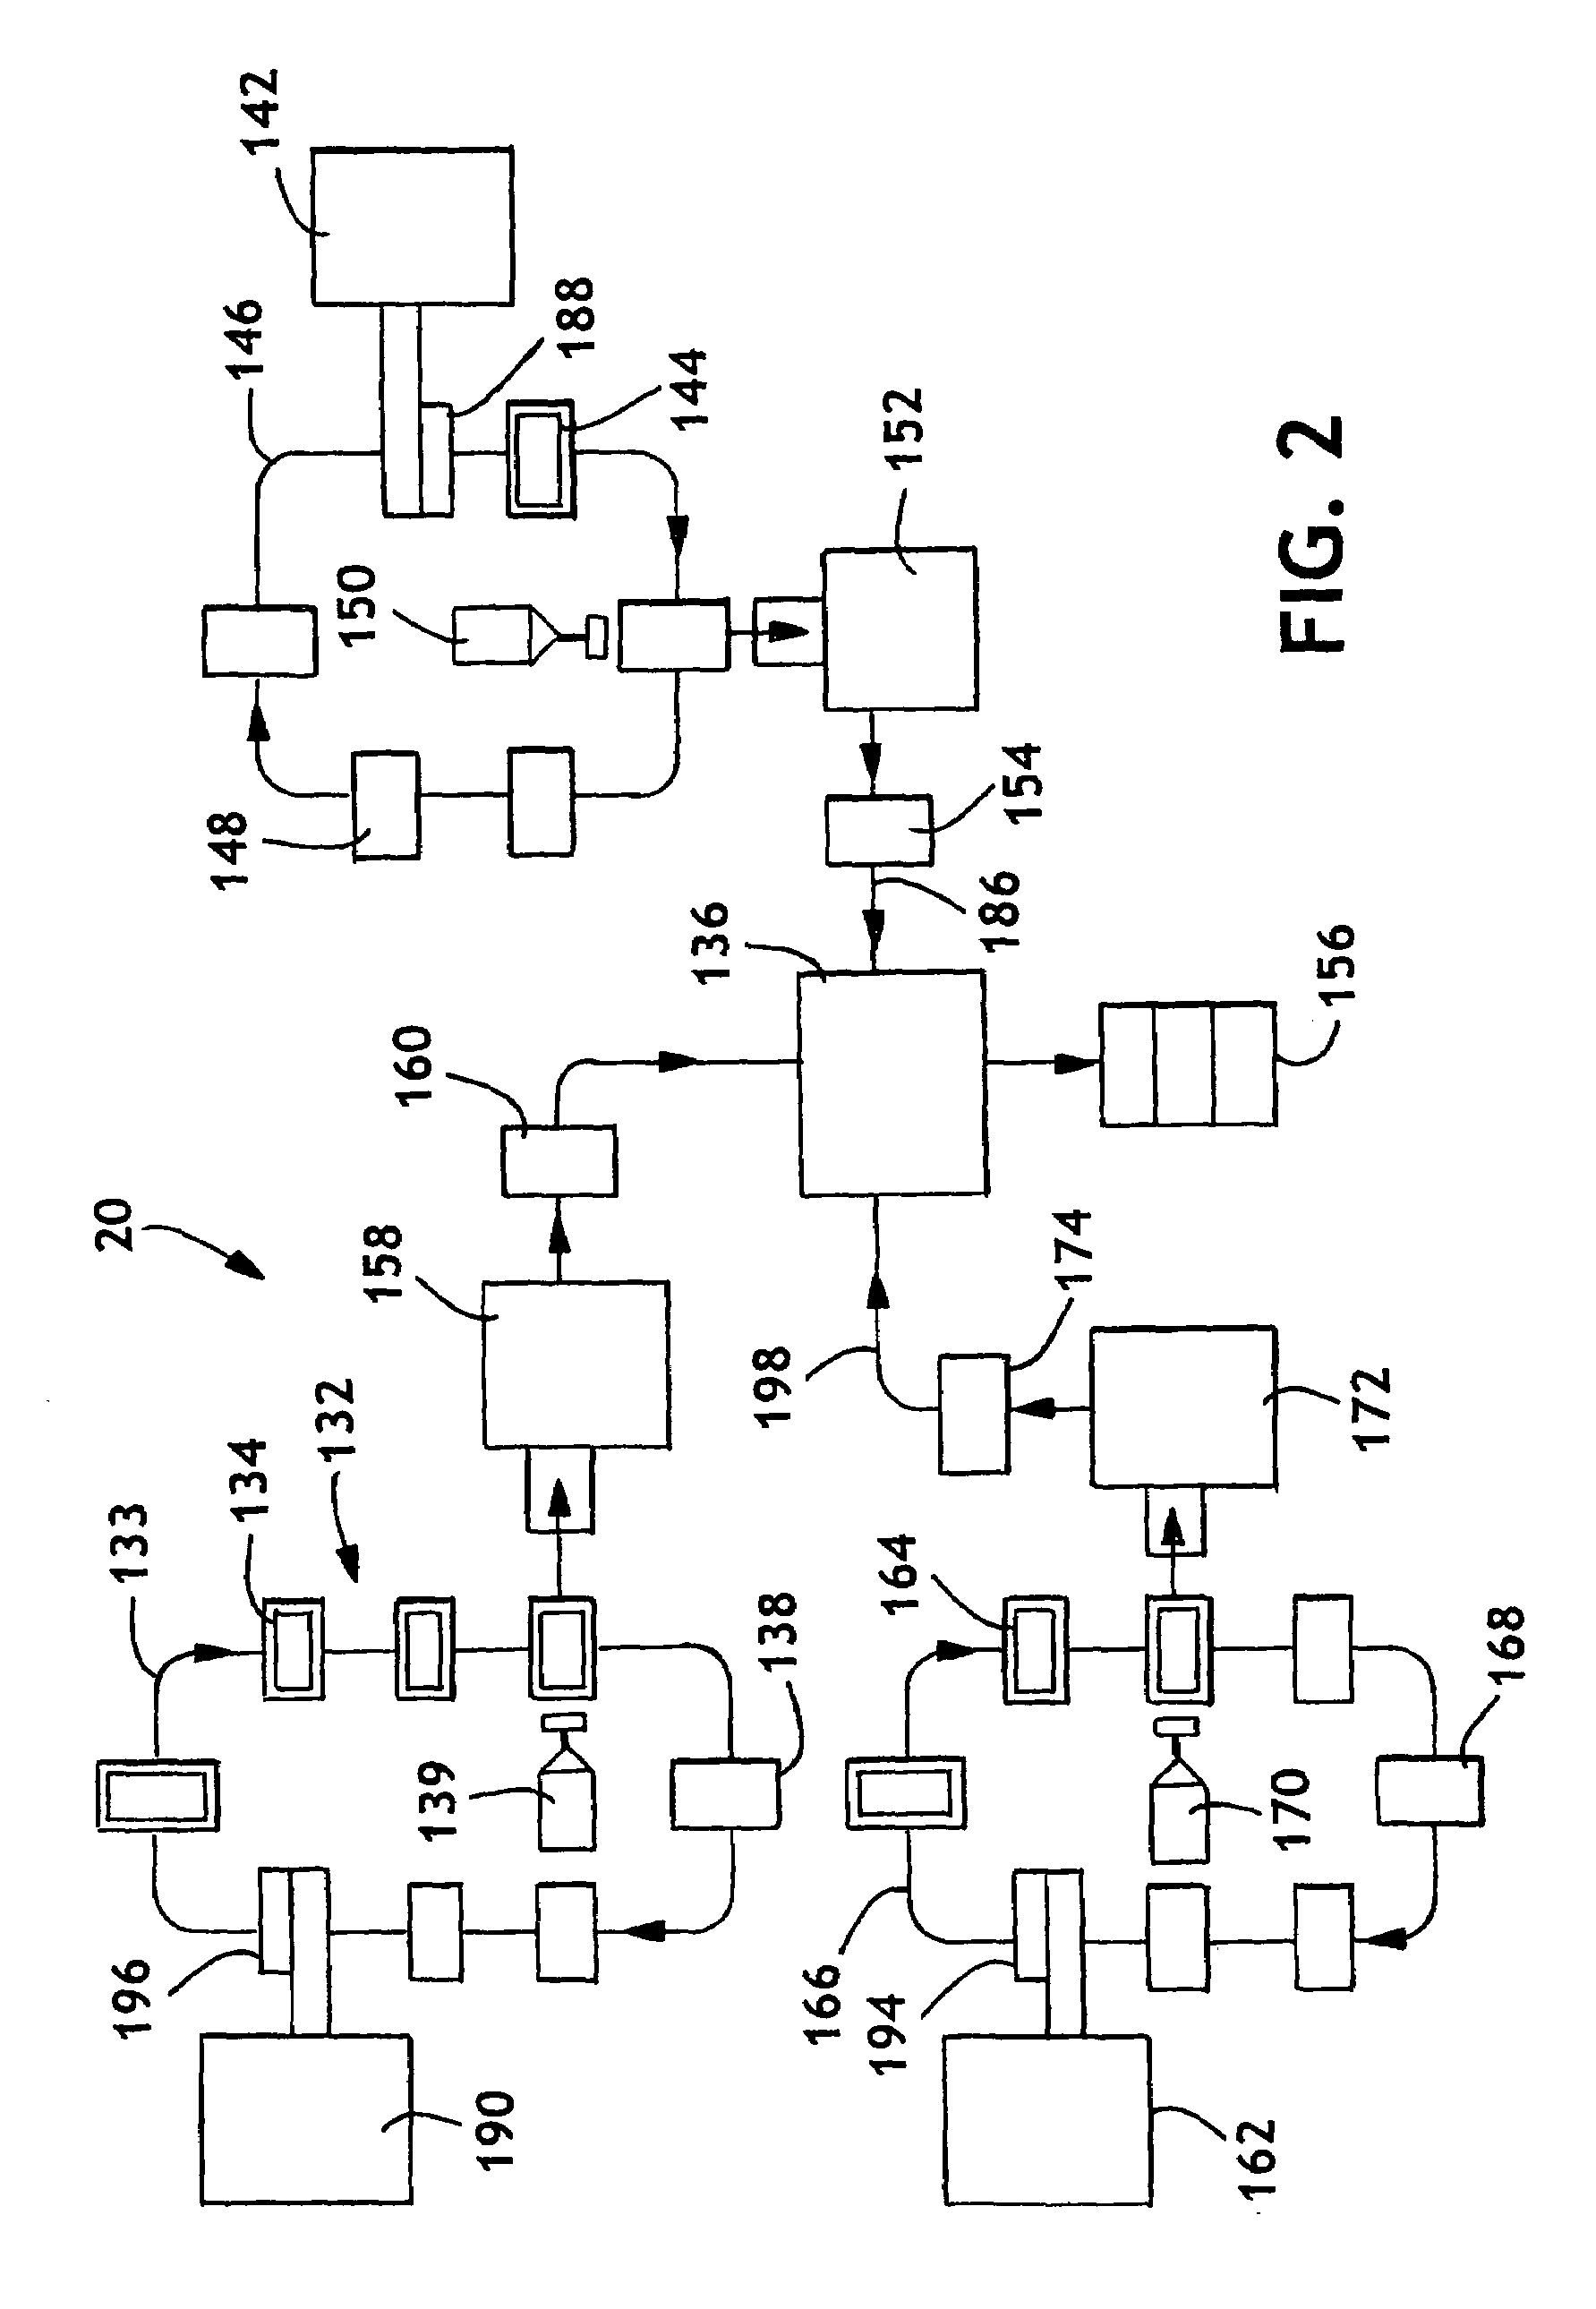 Multi-product accumulating and packing system